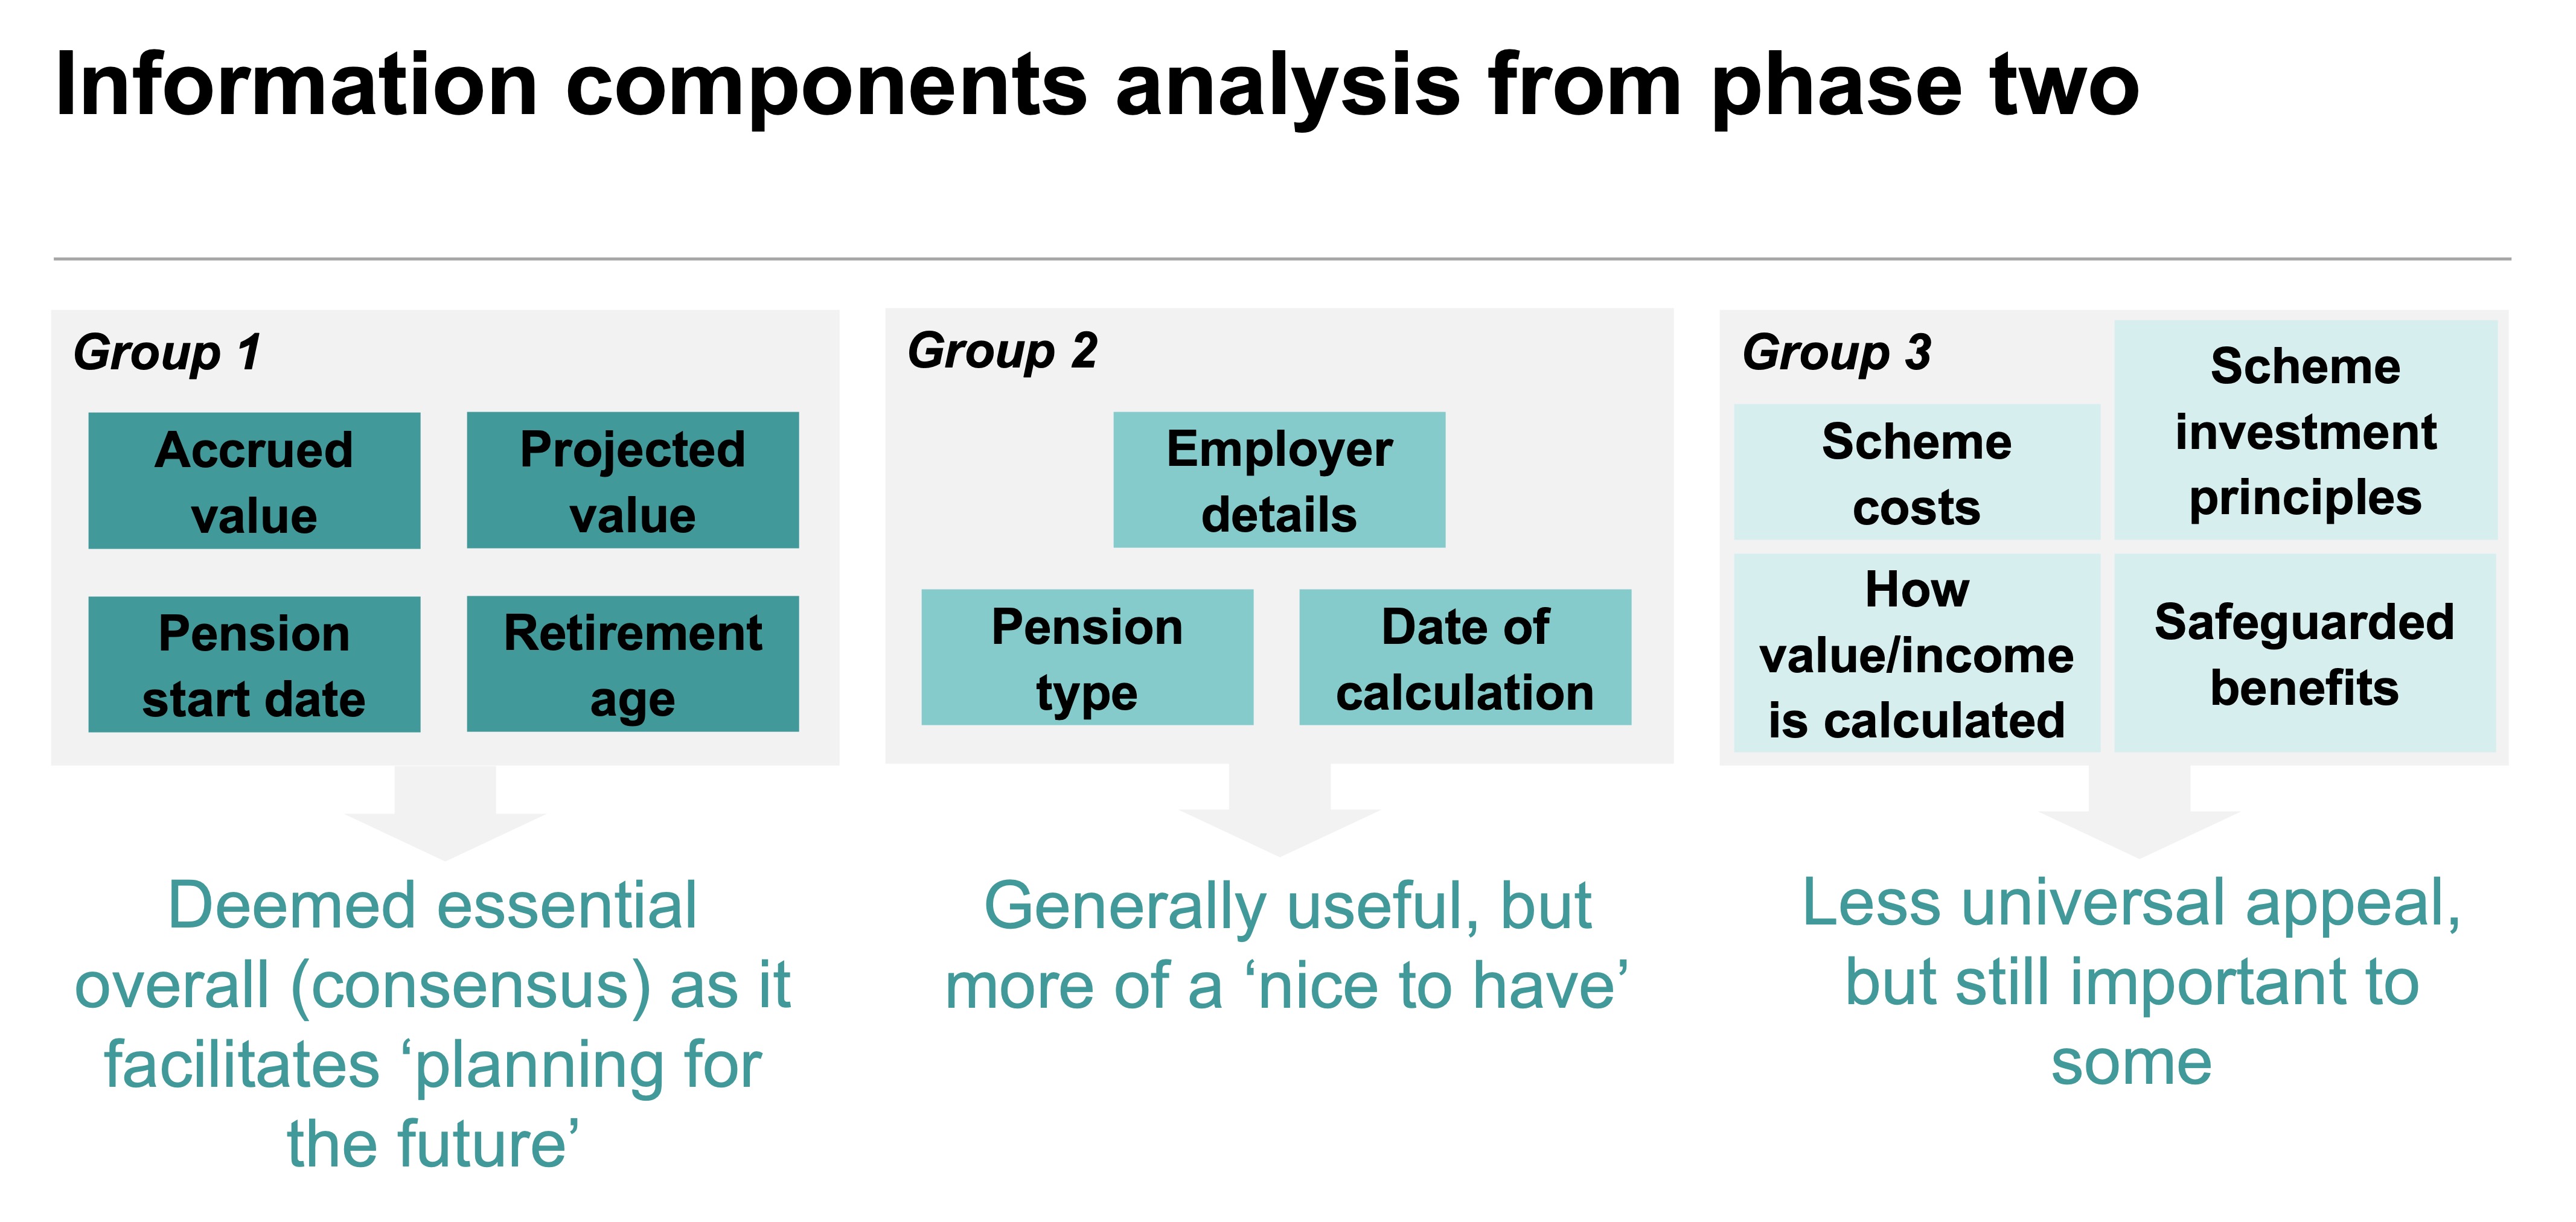 Information components analysis from phase two